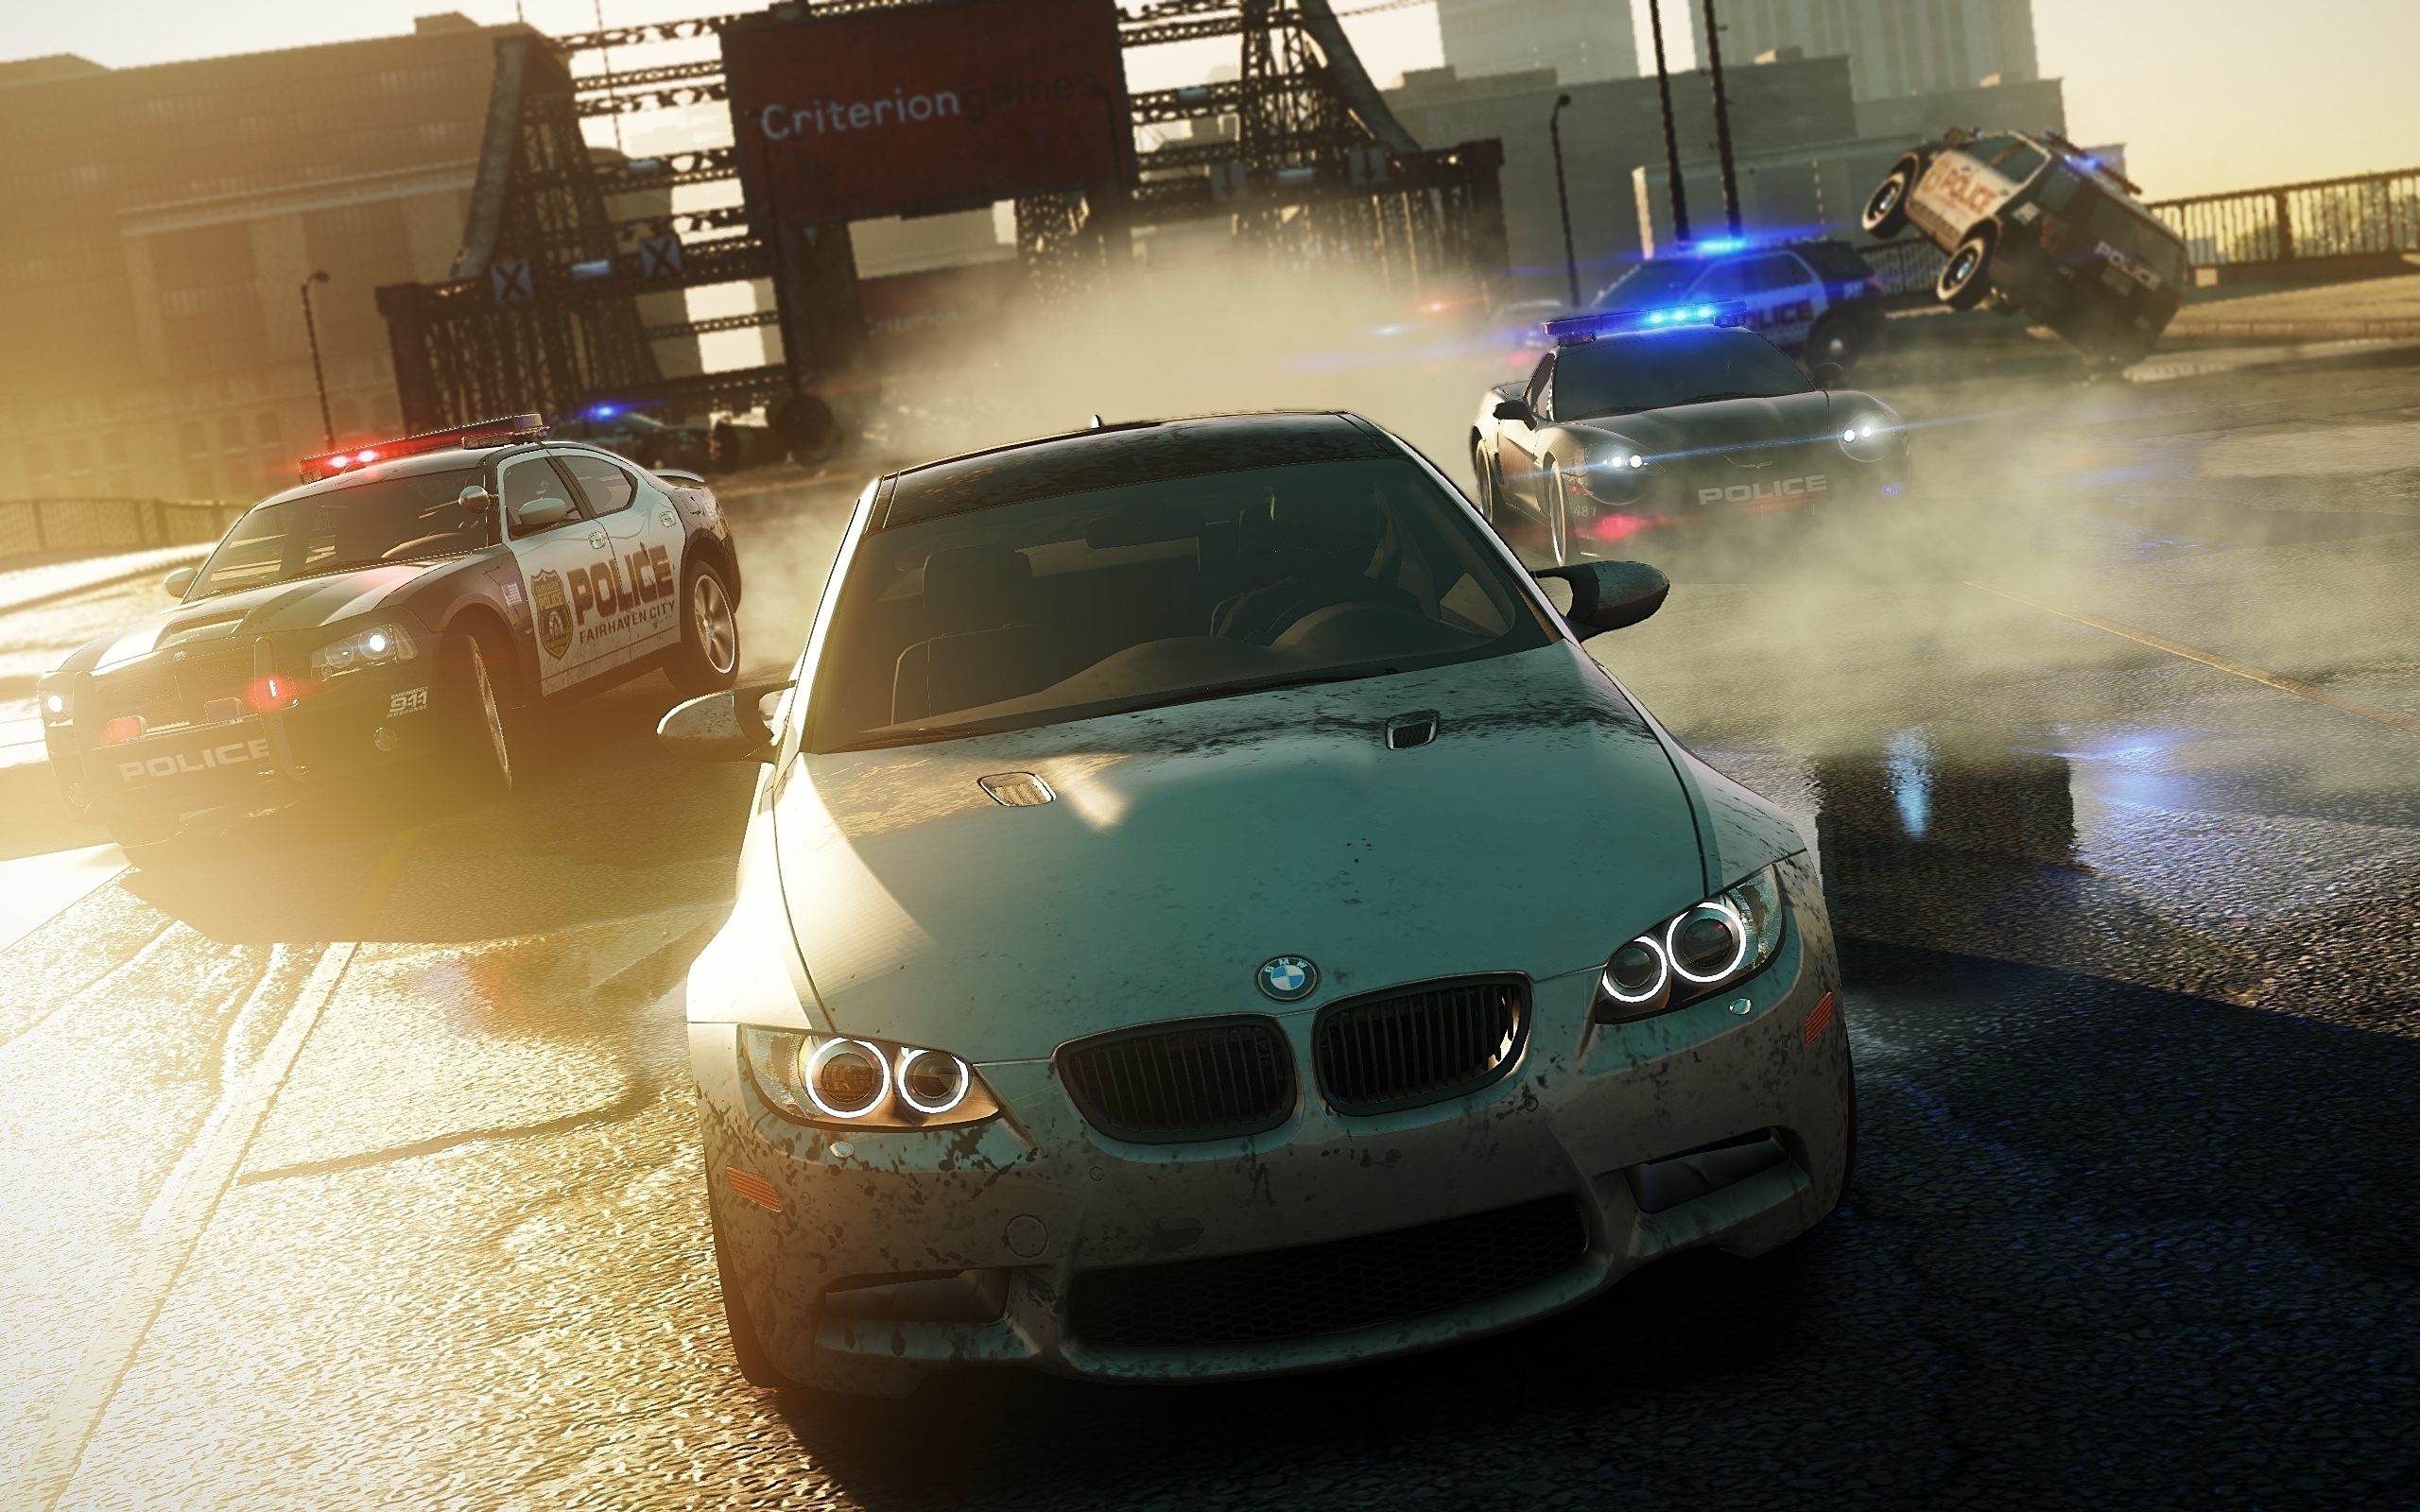 need for speed most wanted ratings